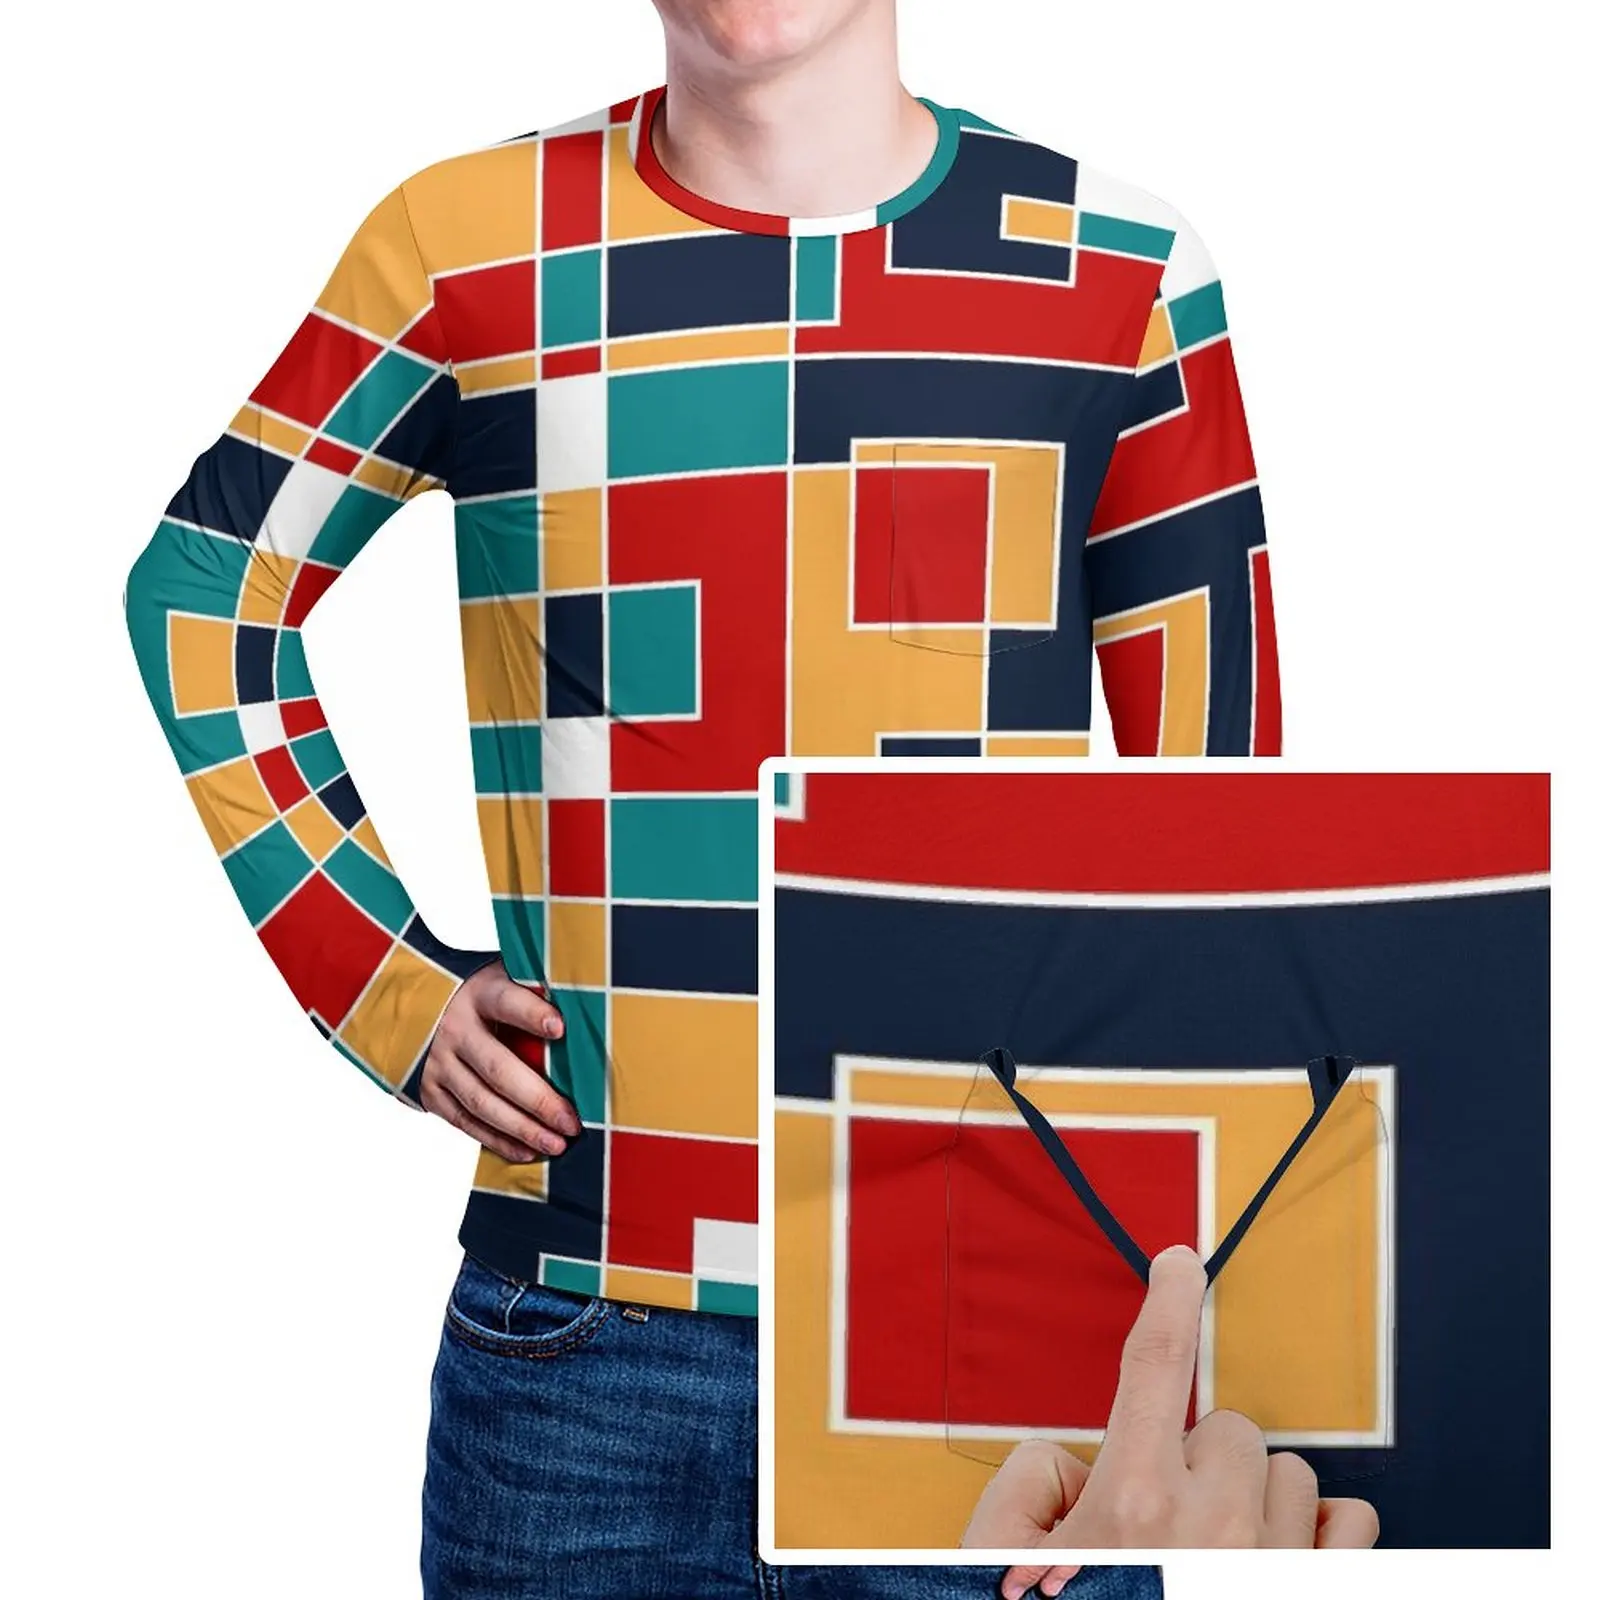 

De Stijl T-Shirt Mod Mondrian Vintage T-Shirts With Pocket Long Sleeve Pattern Tops Autumn Awesome Oversized Top Tees